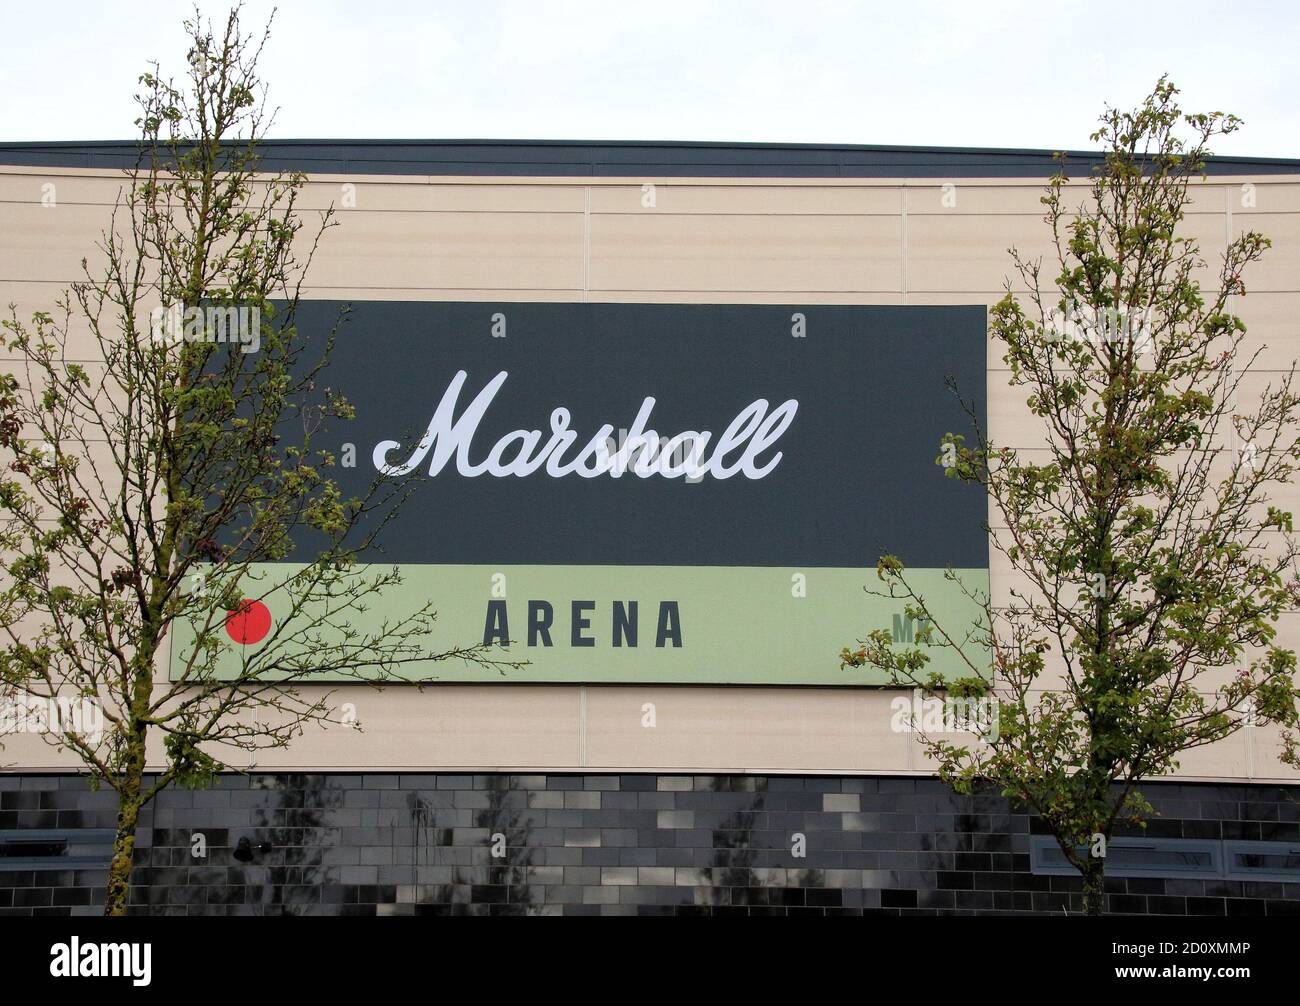 Milton Keynes, UK. 03rd Oct, 2020. Marshall Arena logo seen outside the ground.EFL Sky Bet League One club MK Dons continues to play matches behind closed doors during the Covid-19 restrictions. The club's Marshall Arena is empty on a day they are playing league leaders Ipswich Town and would likely have had a full house. Many clubs outside the English Premier League fear for their future without any financial help with no revenue coming in on match days. Result of the game - MK Dons drew with Ipswich Town 1-1 in the EFL Sky Bet League One. Credit: SOPA Images Limited/Alamy Live News Stock Photo